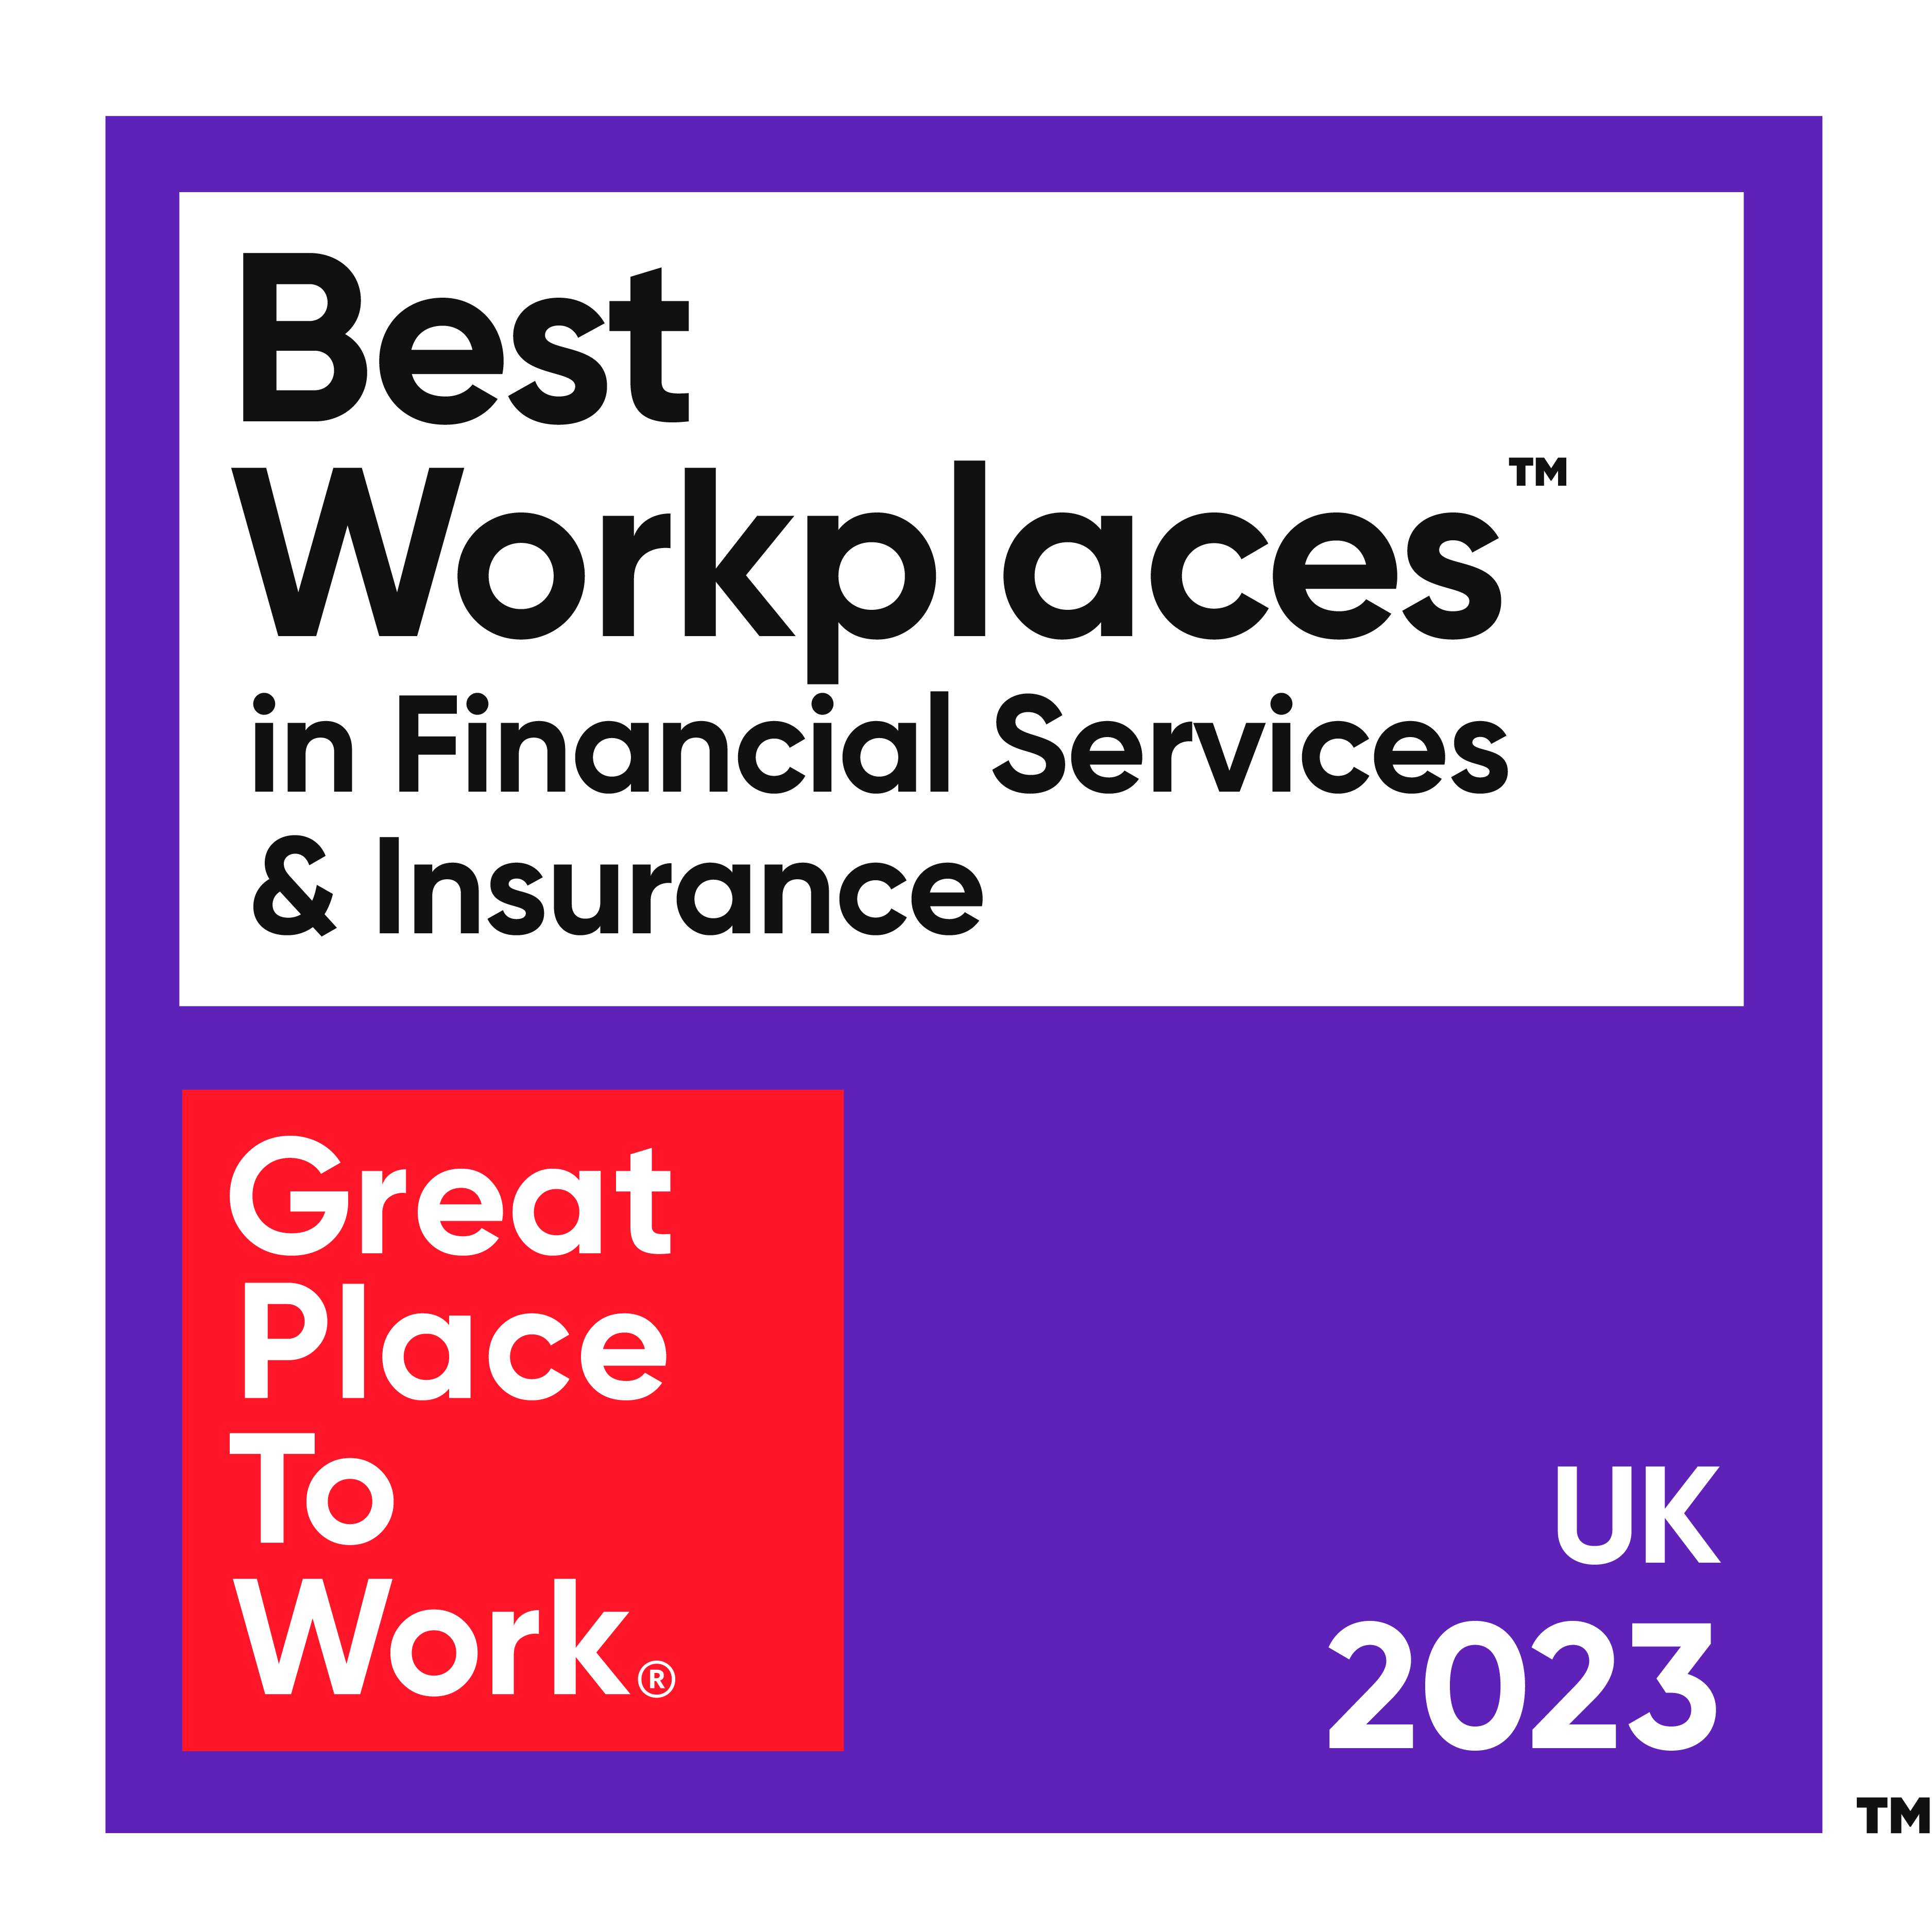 Best workplaces in FinServices and Insurance